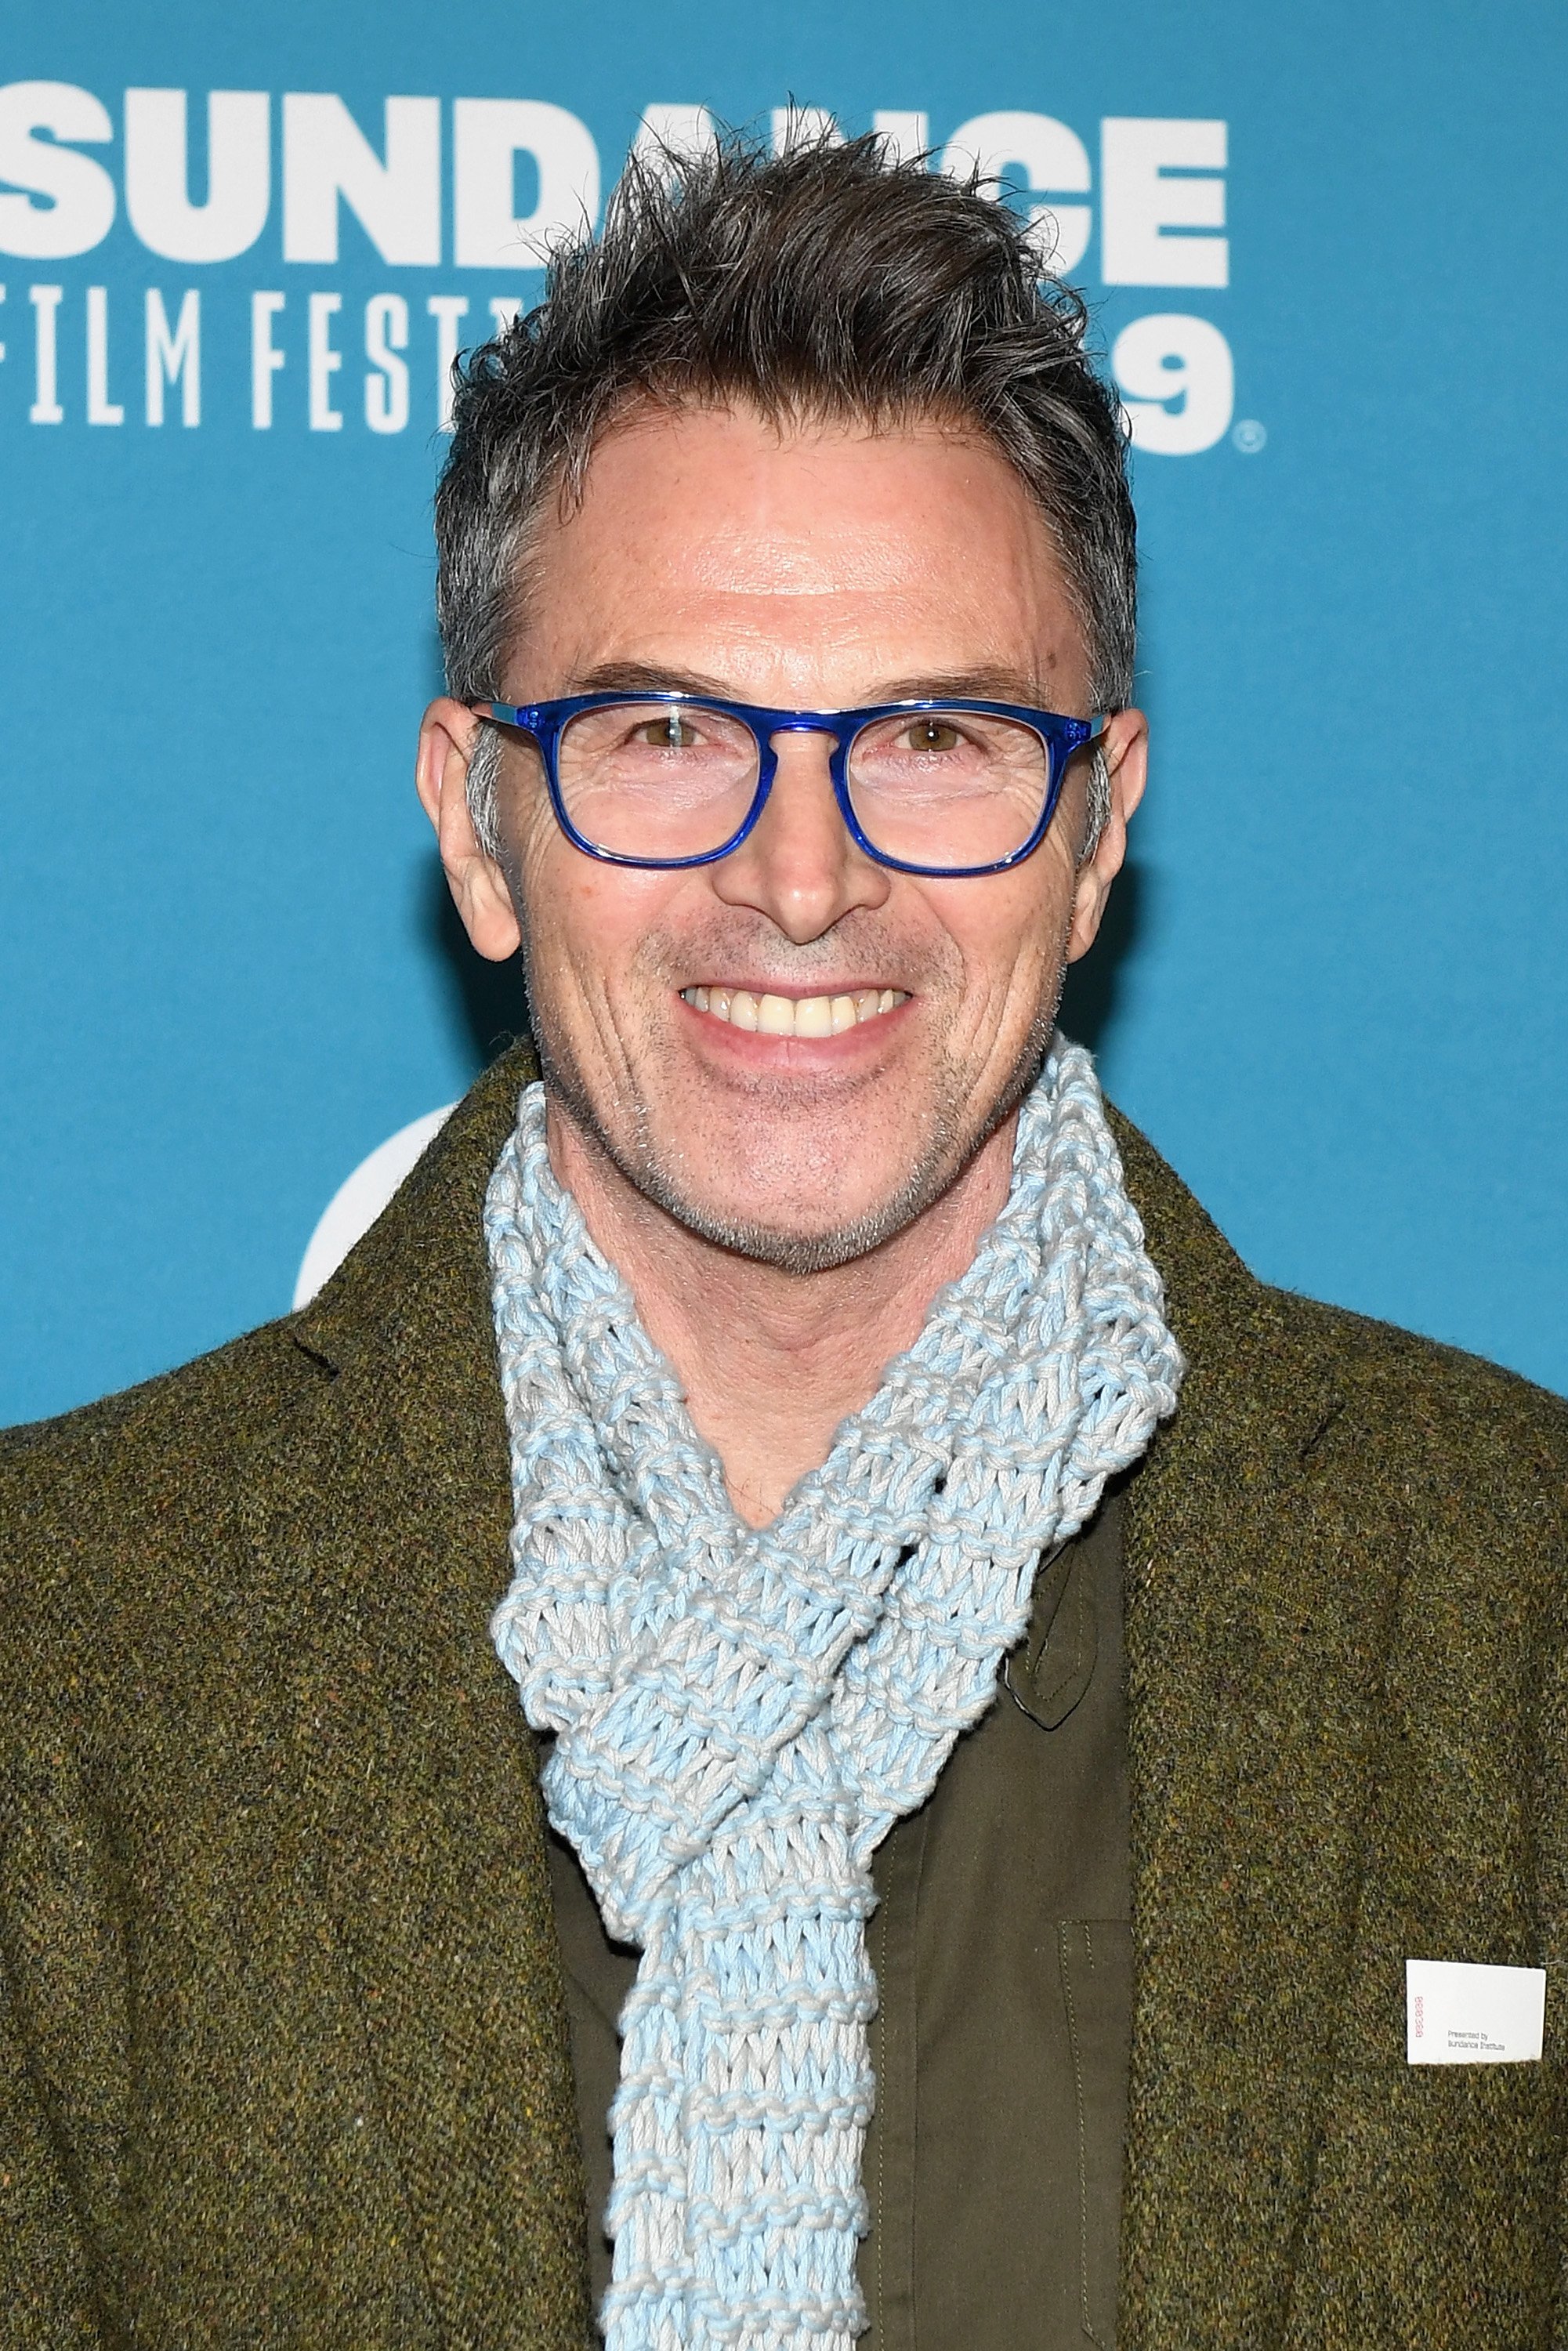 Tim Daly attend the "Before You Know It" Premiere at the 2019 Sundance Film Festival on January 27, 2019, in Park City, Utah. | Source: Getty Images